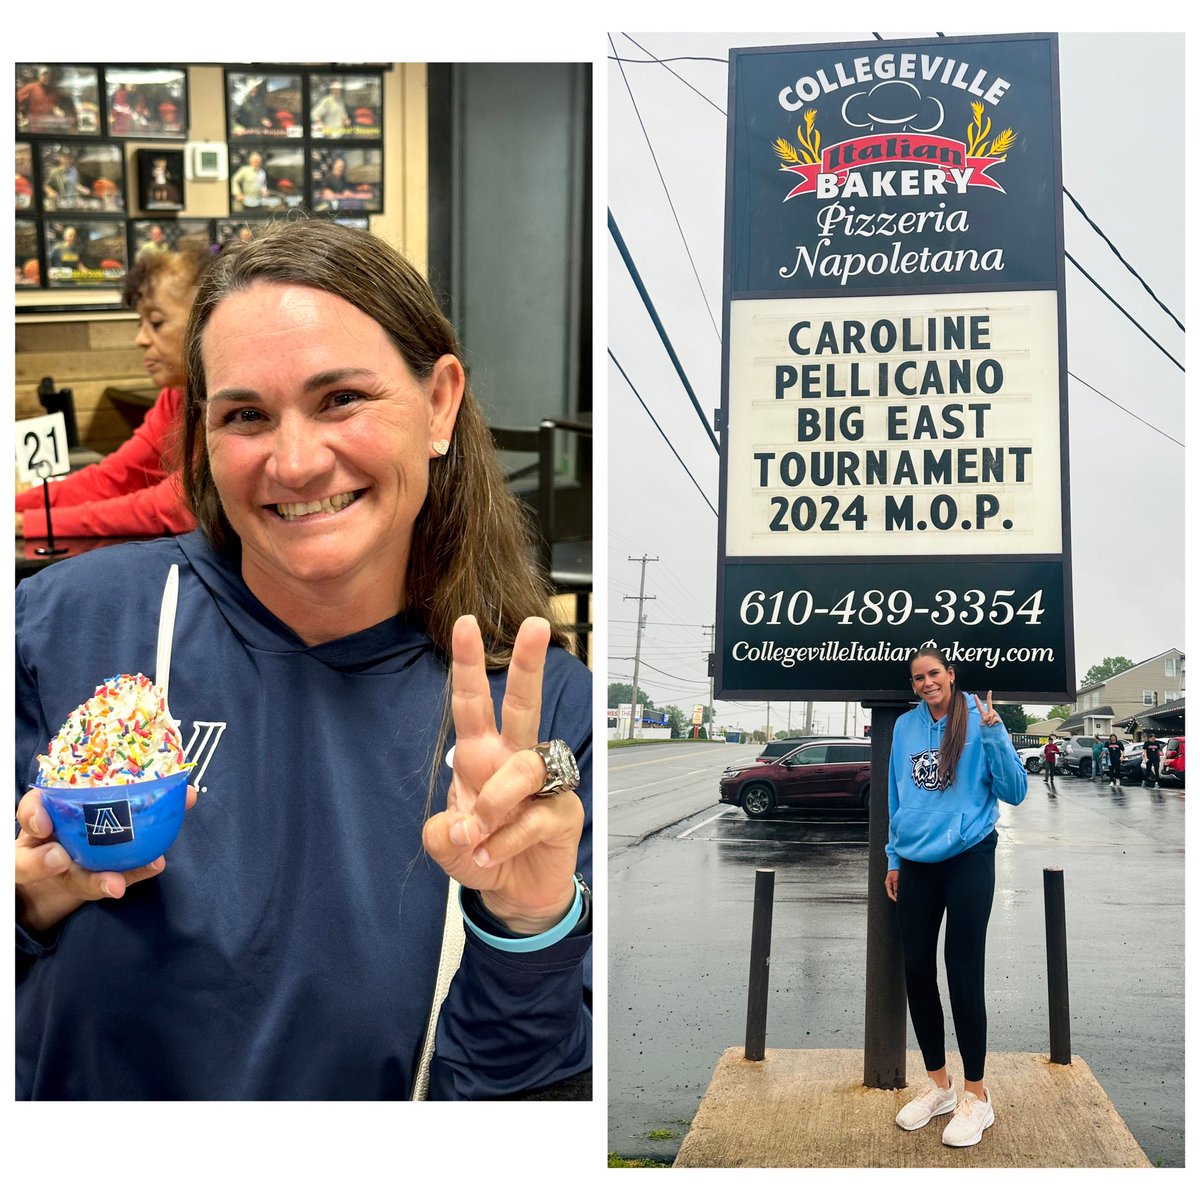 Our #PizzaiolioftheDay is @VUSoftball Head Coach @bridgetorchard! \V/ 🥎 An honor to host Coach Orchard & the 2024 Big East Champs for a team dinner before they head to Arkansas for the Fayetteville Regional! #collegevilleitalianbakery #morethanabakery #GoNova #NovaNation